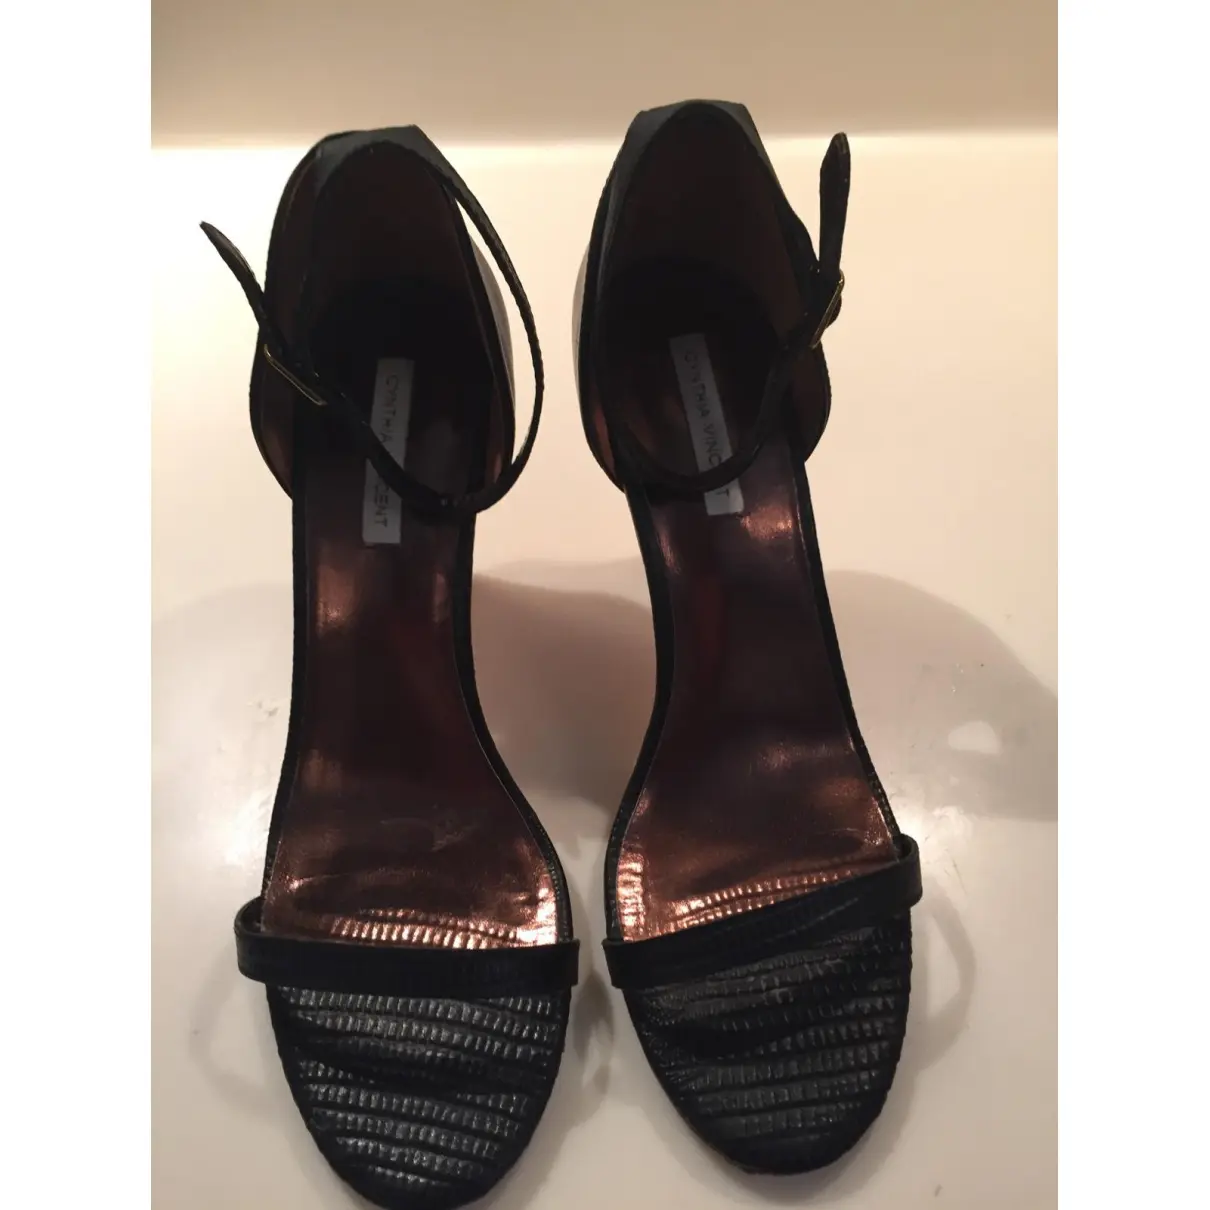 Cynthia Vincent Leather sandal for sale